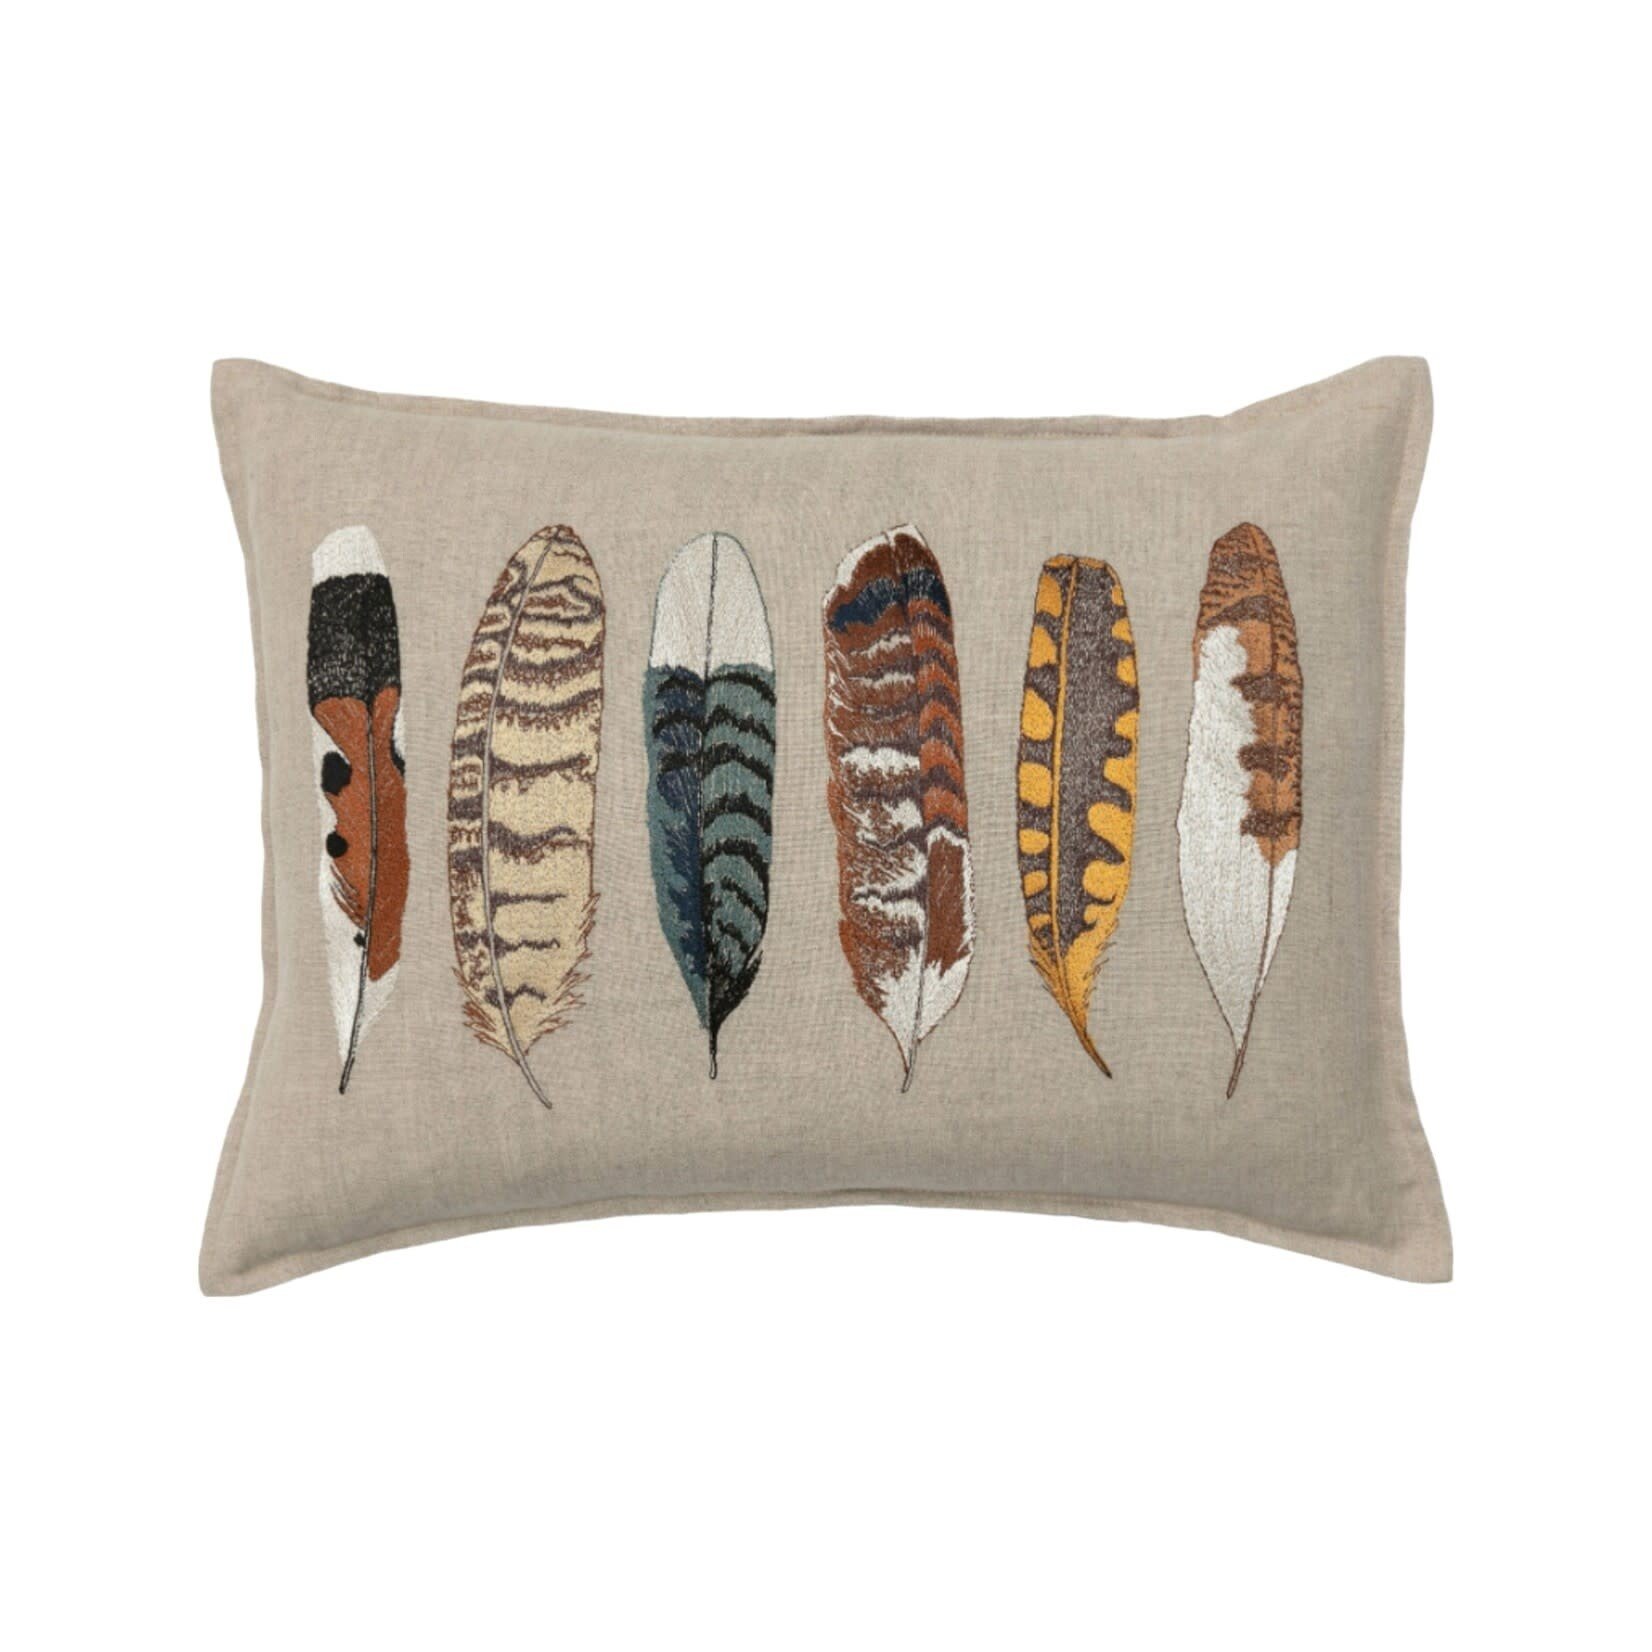 Coral & Tusk Feathers Pillow